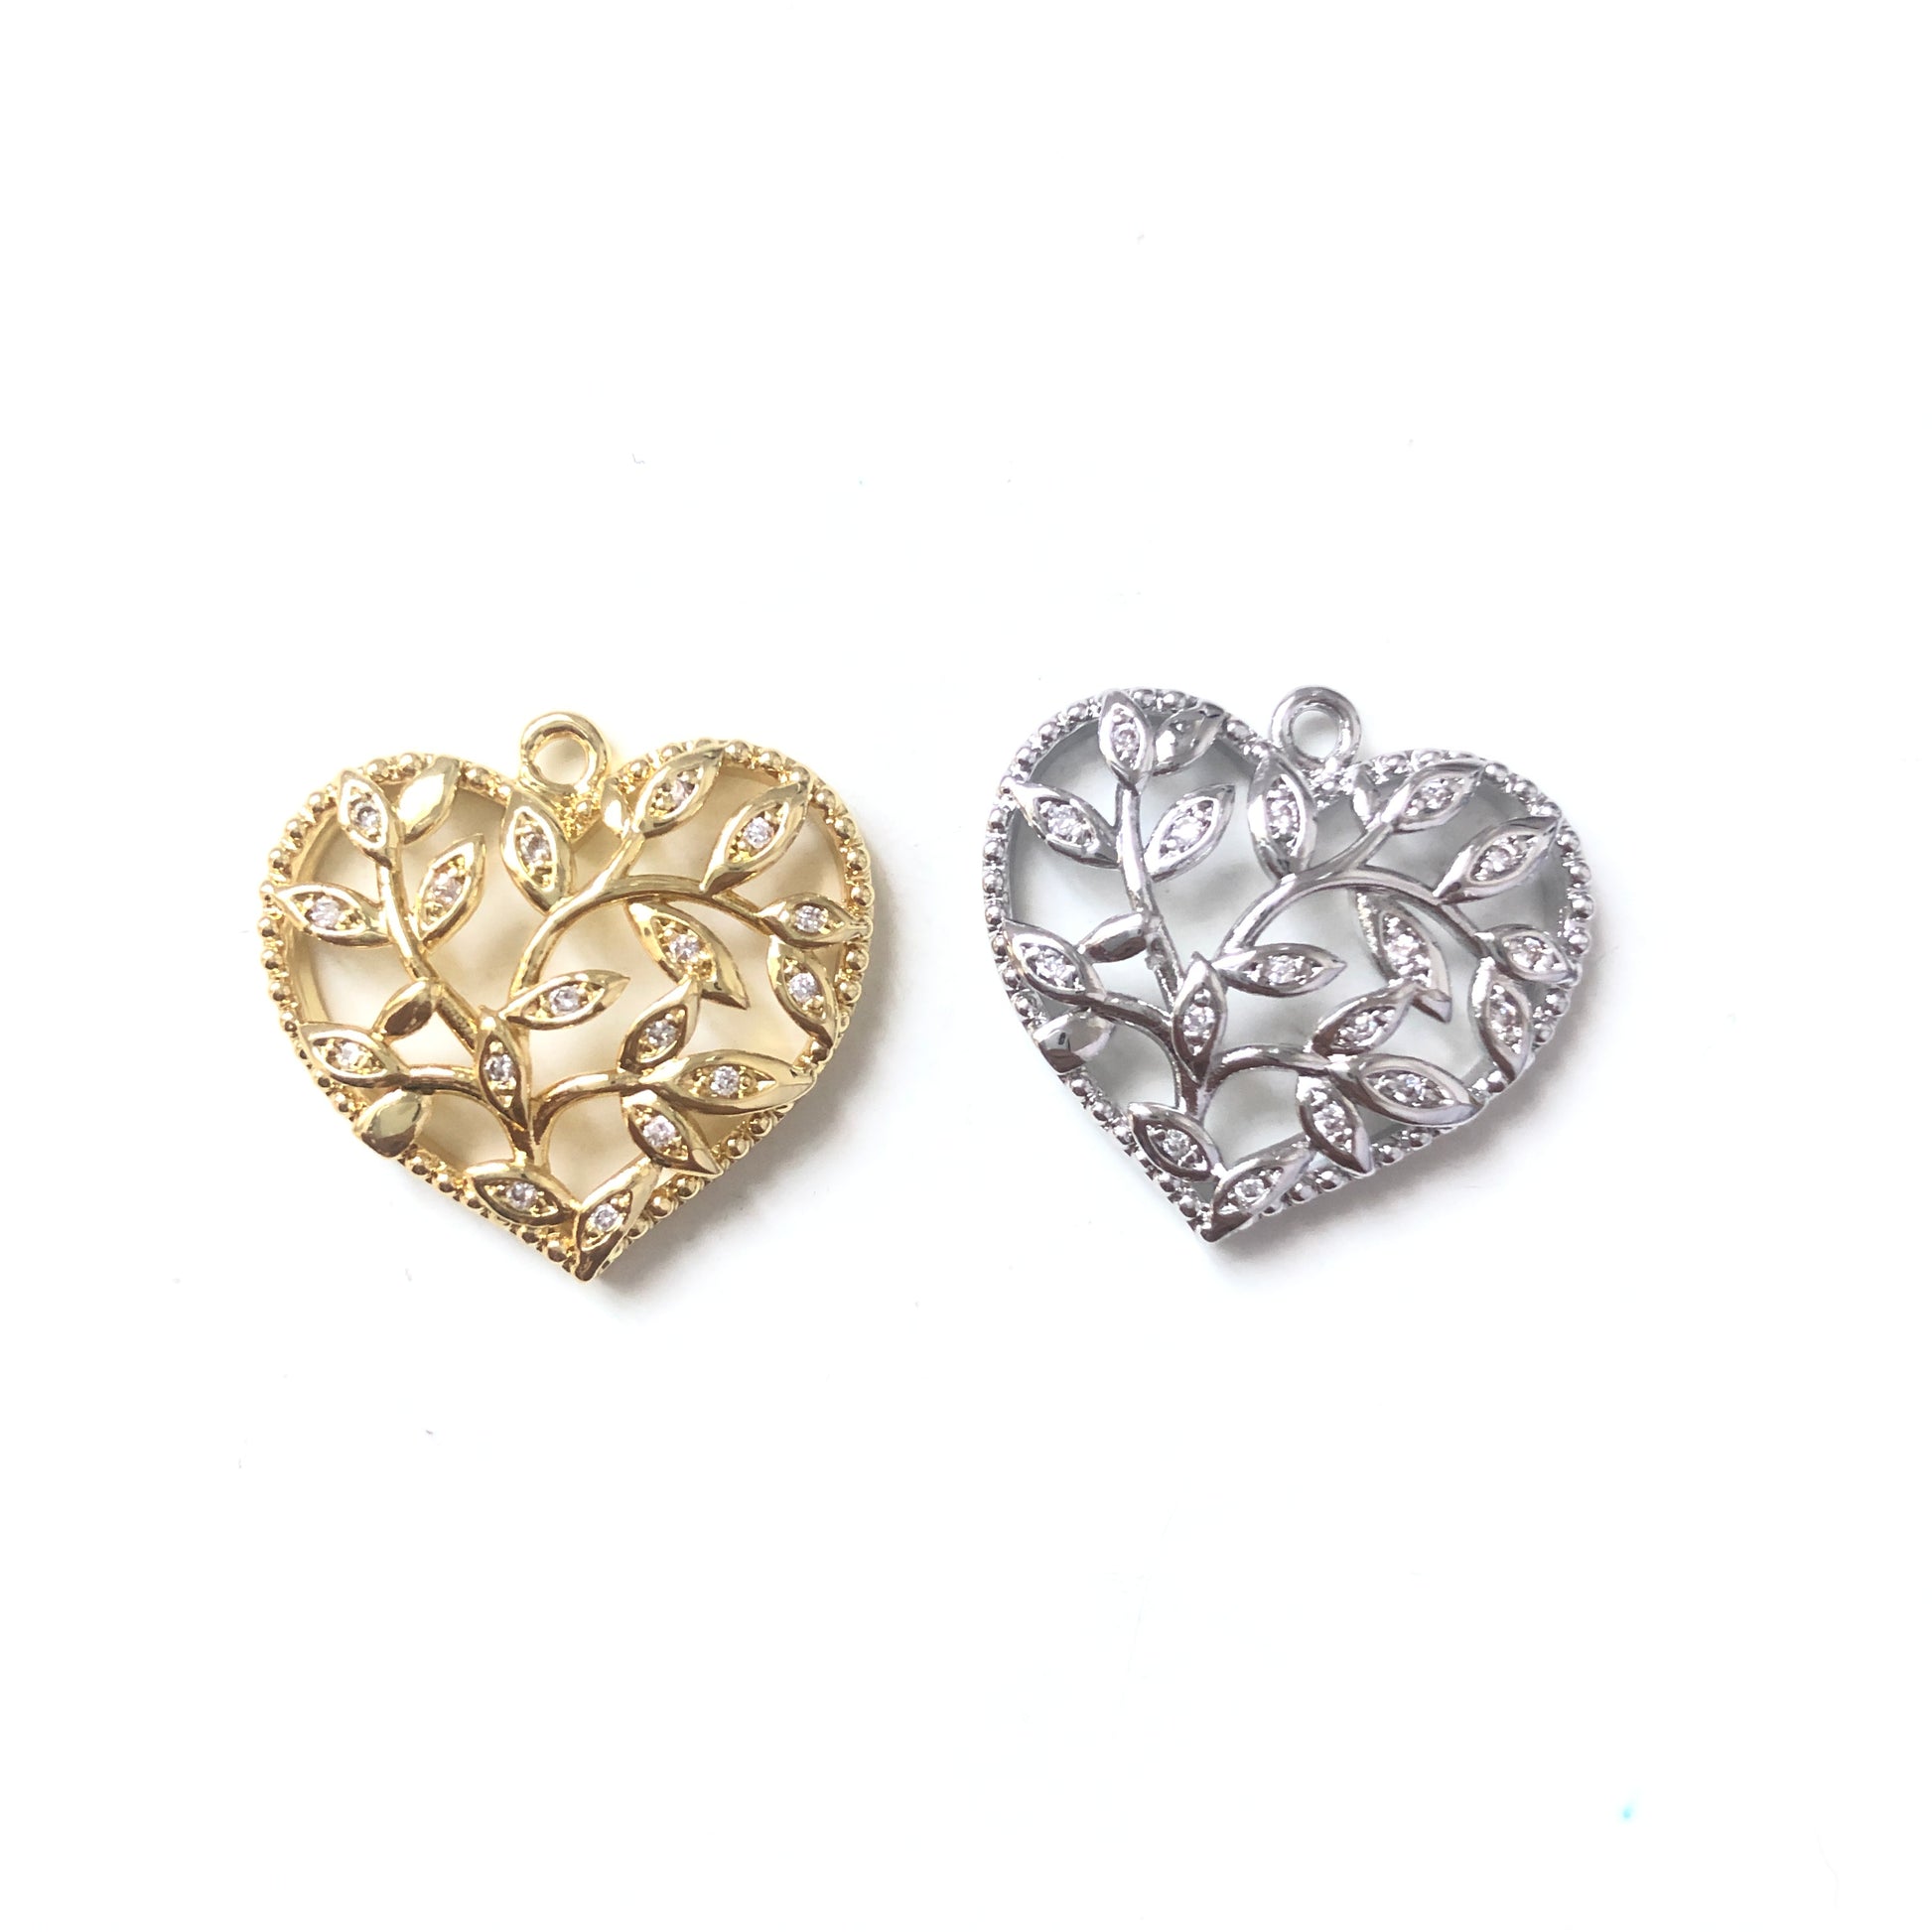 10pcs/lot 22.7*24mm CZ Paved Hollow Heart Charms CZ Paved Charms Hearts Charms Beads Beyond